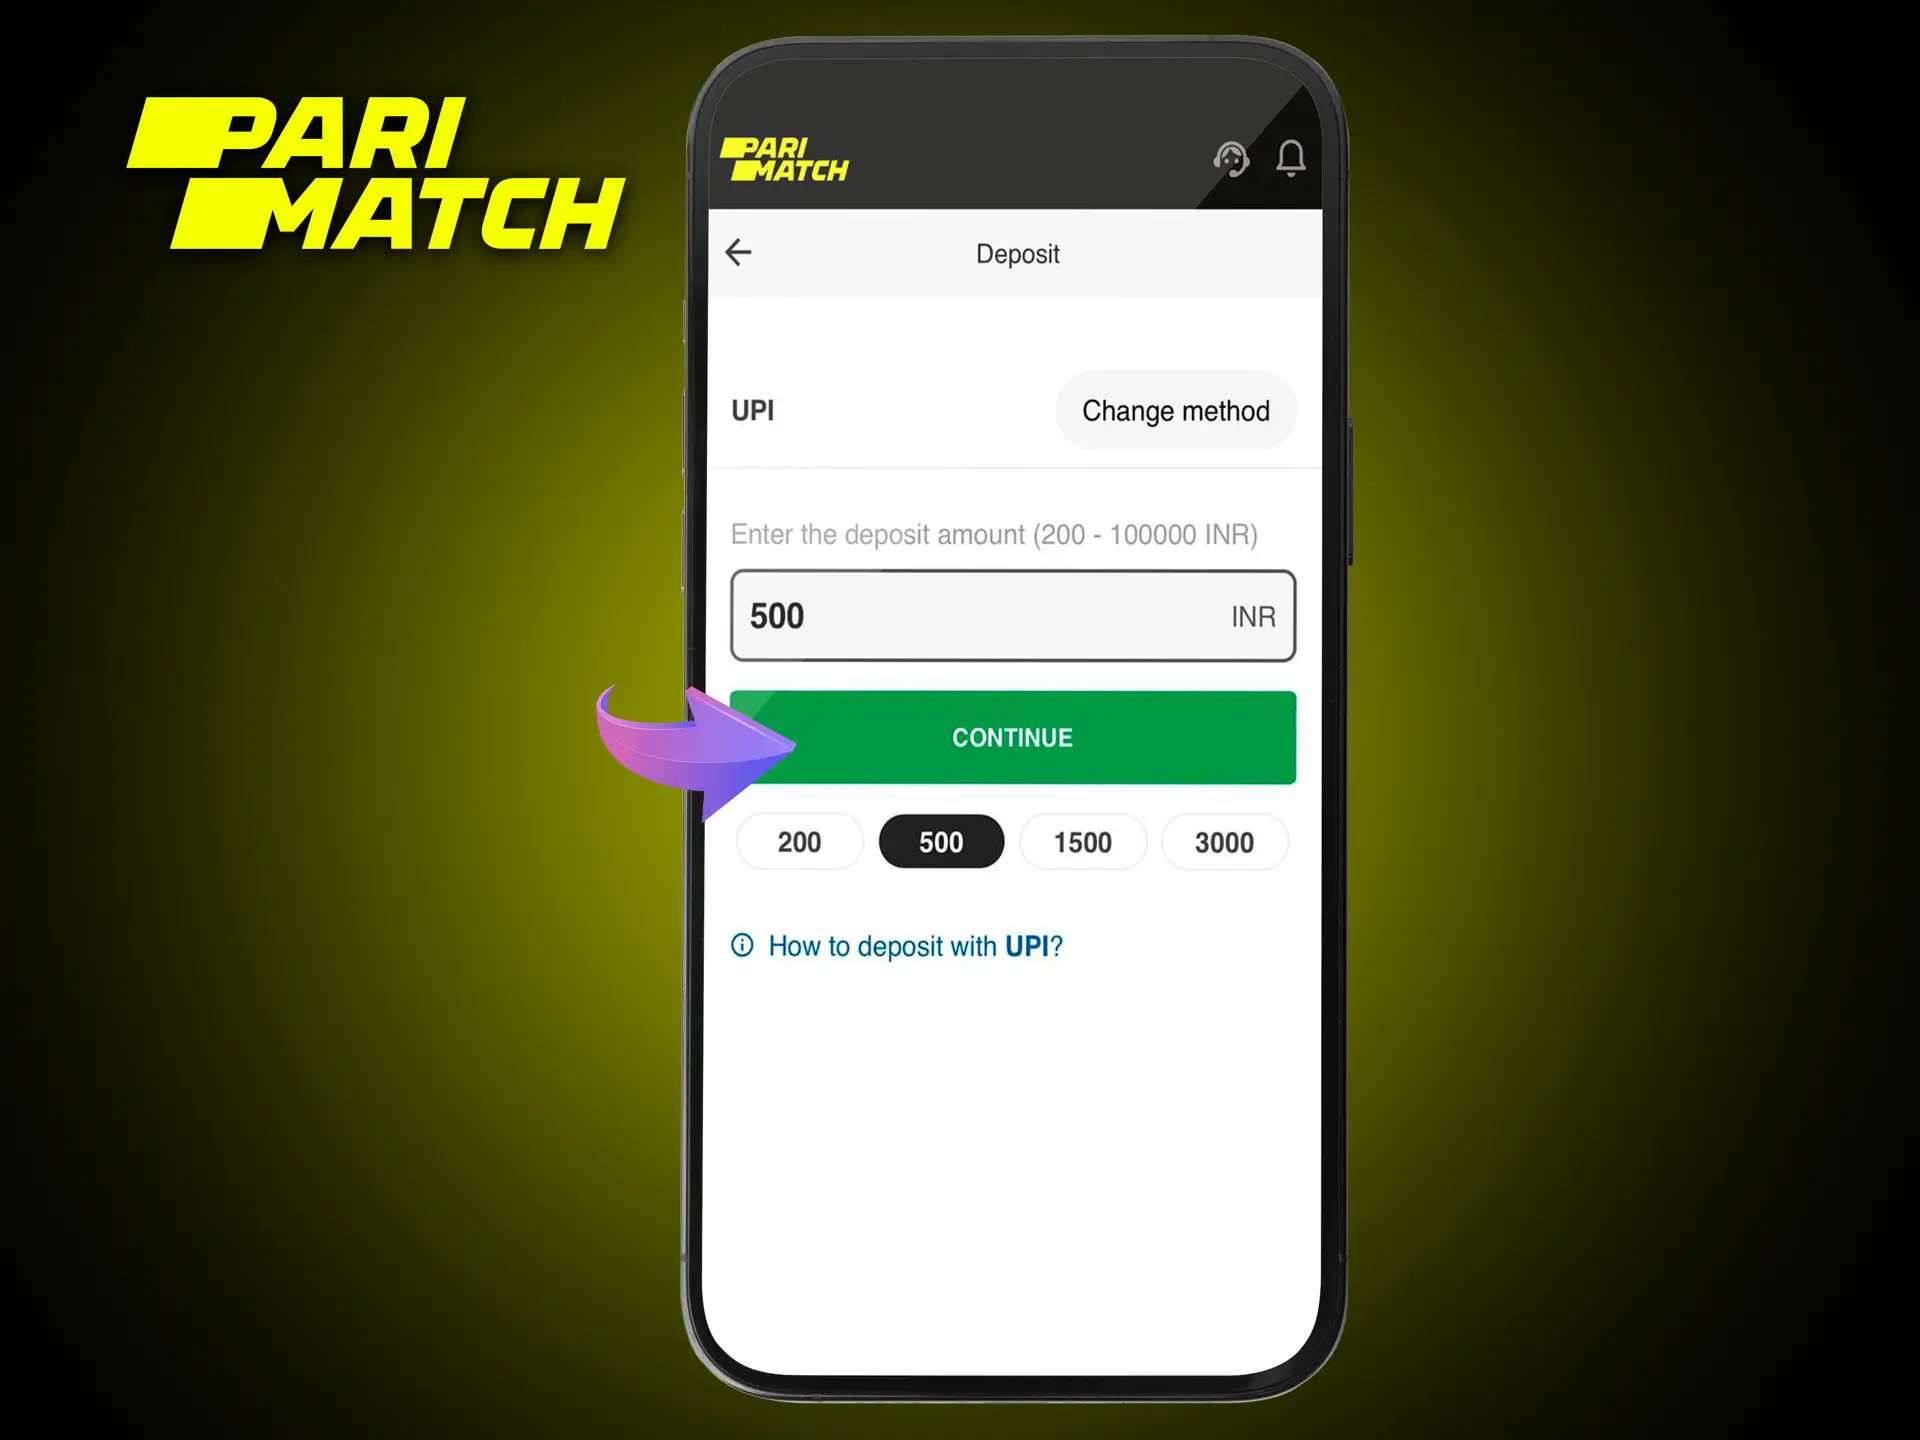 Make your first deposit at PariMatch to unlock access to real money betting.